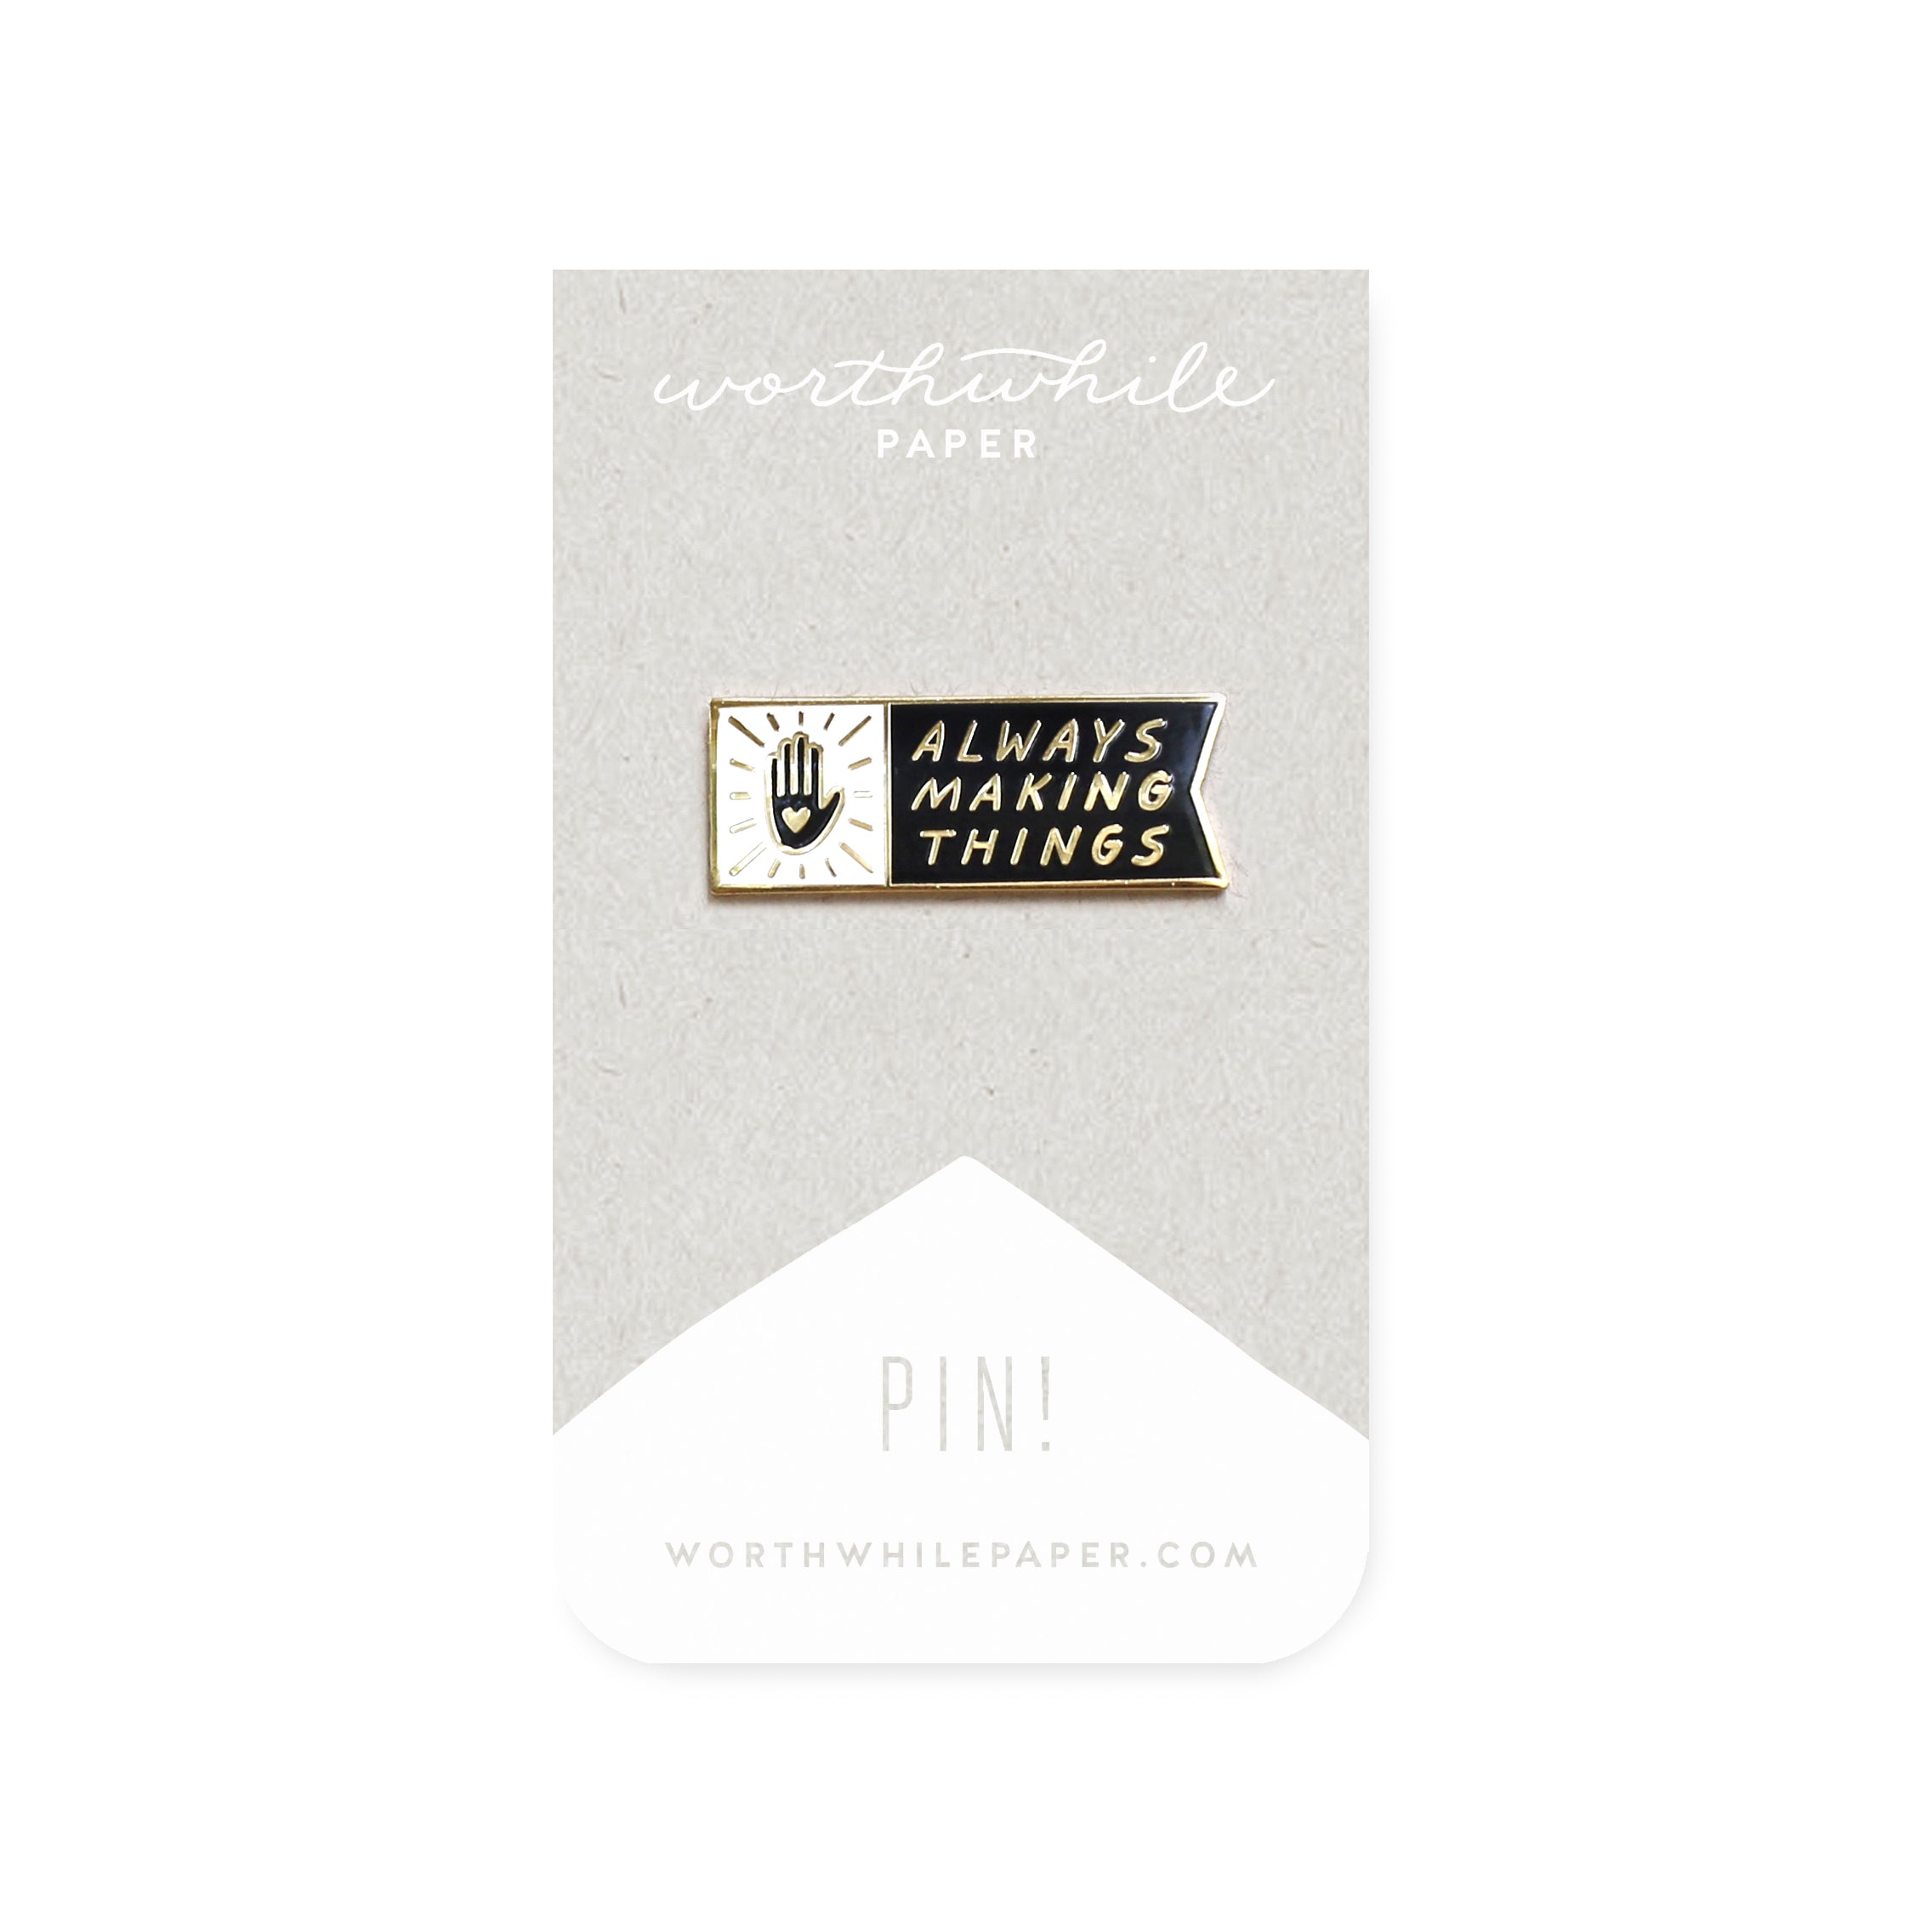 Pin on Things I want to buy